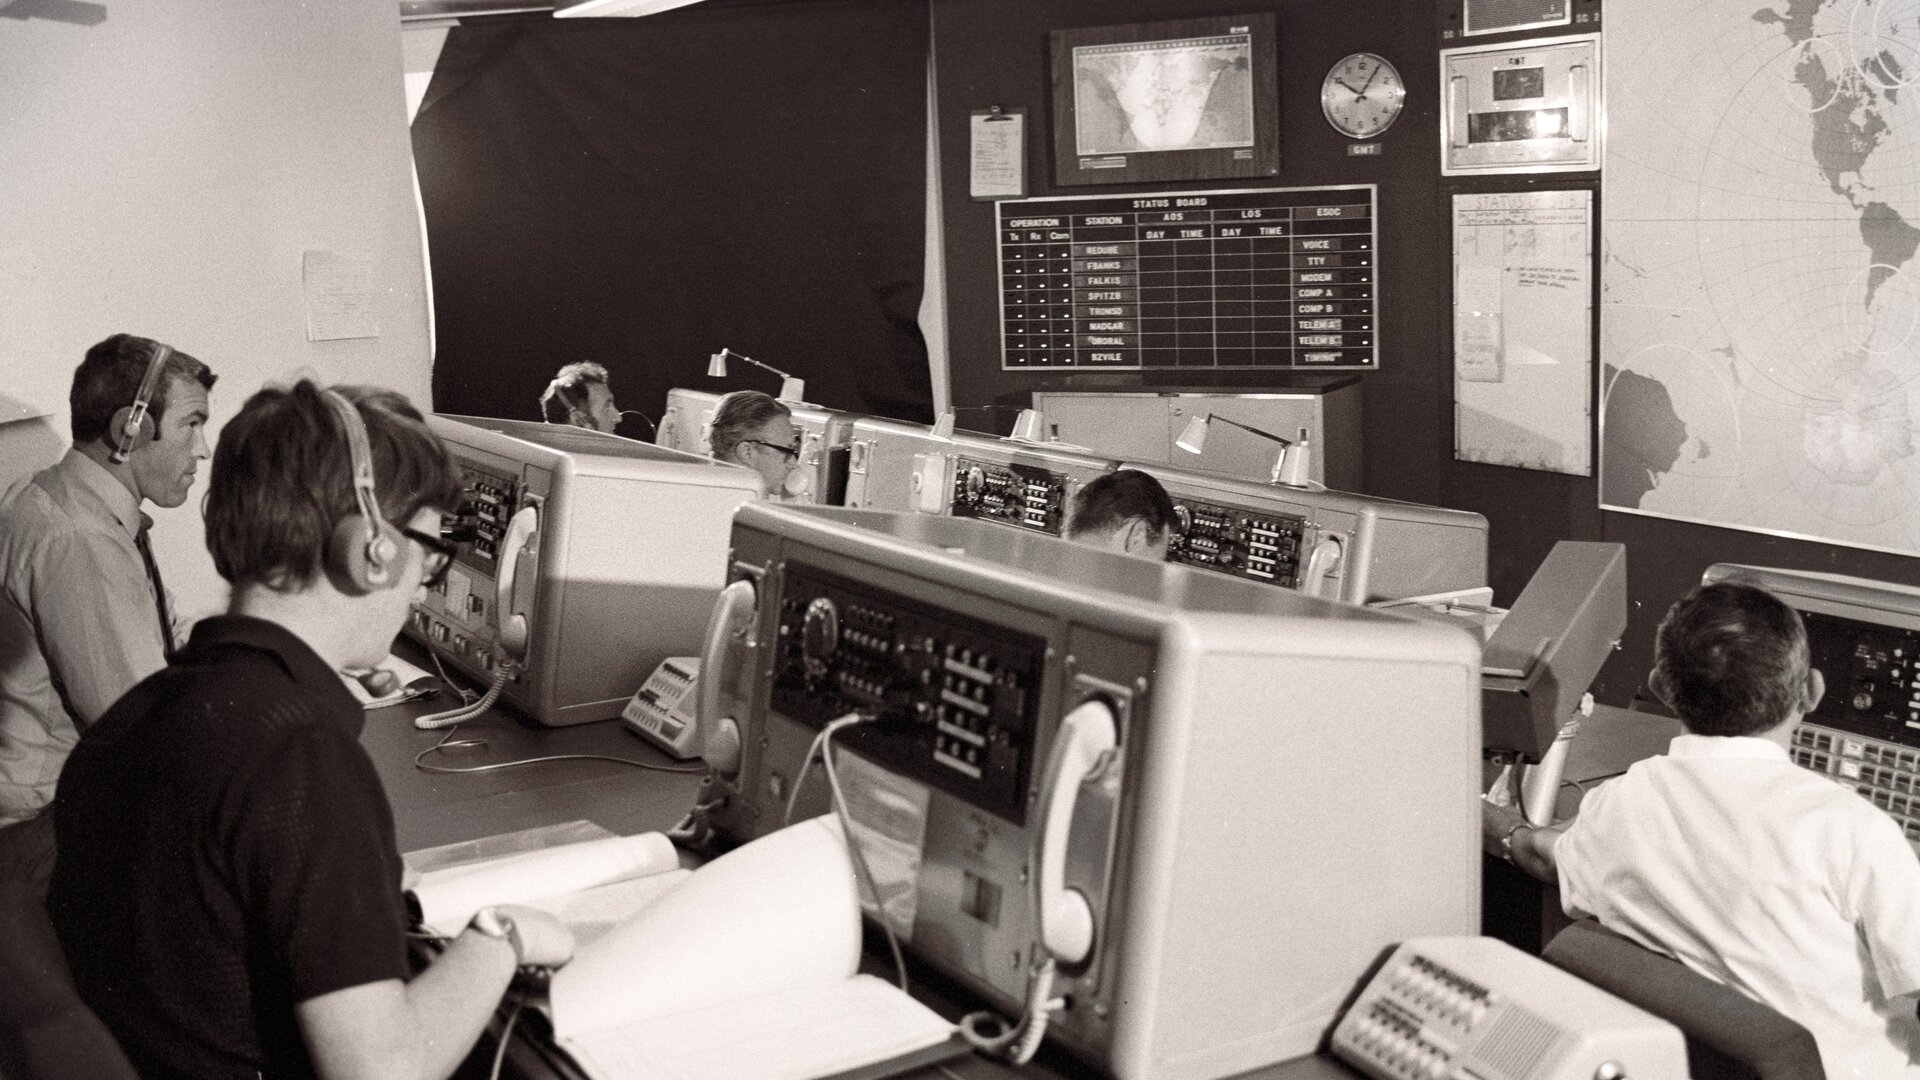 Control facilities in the 1960s